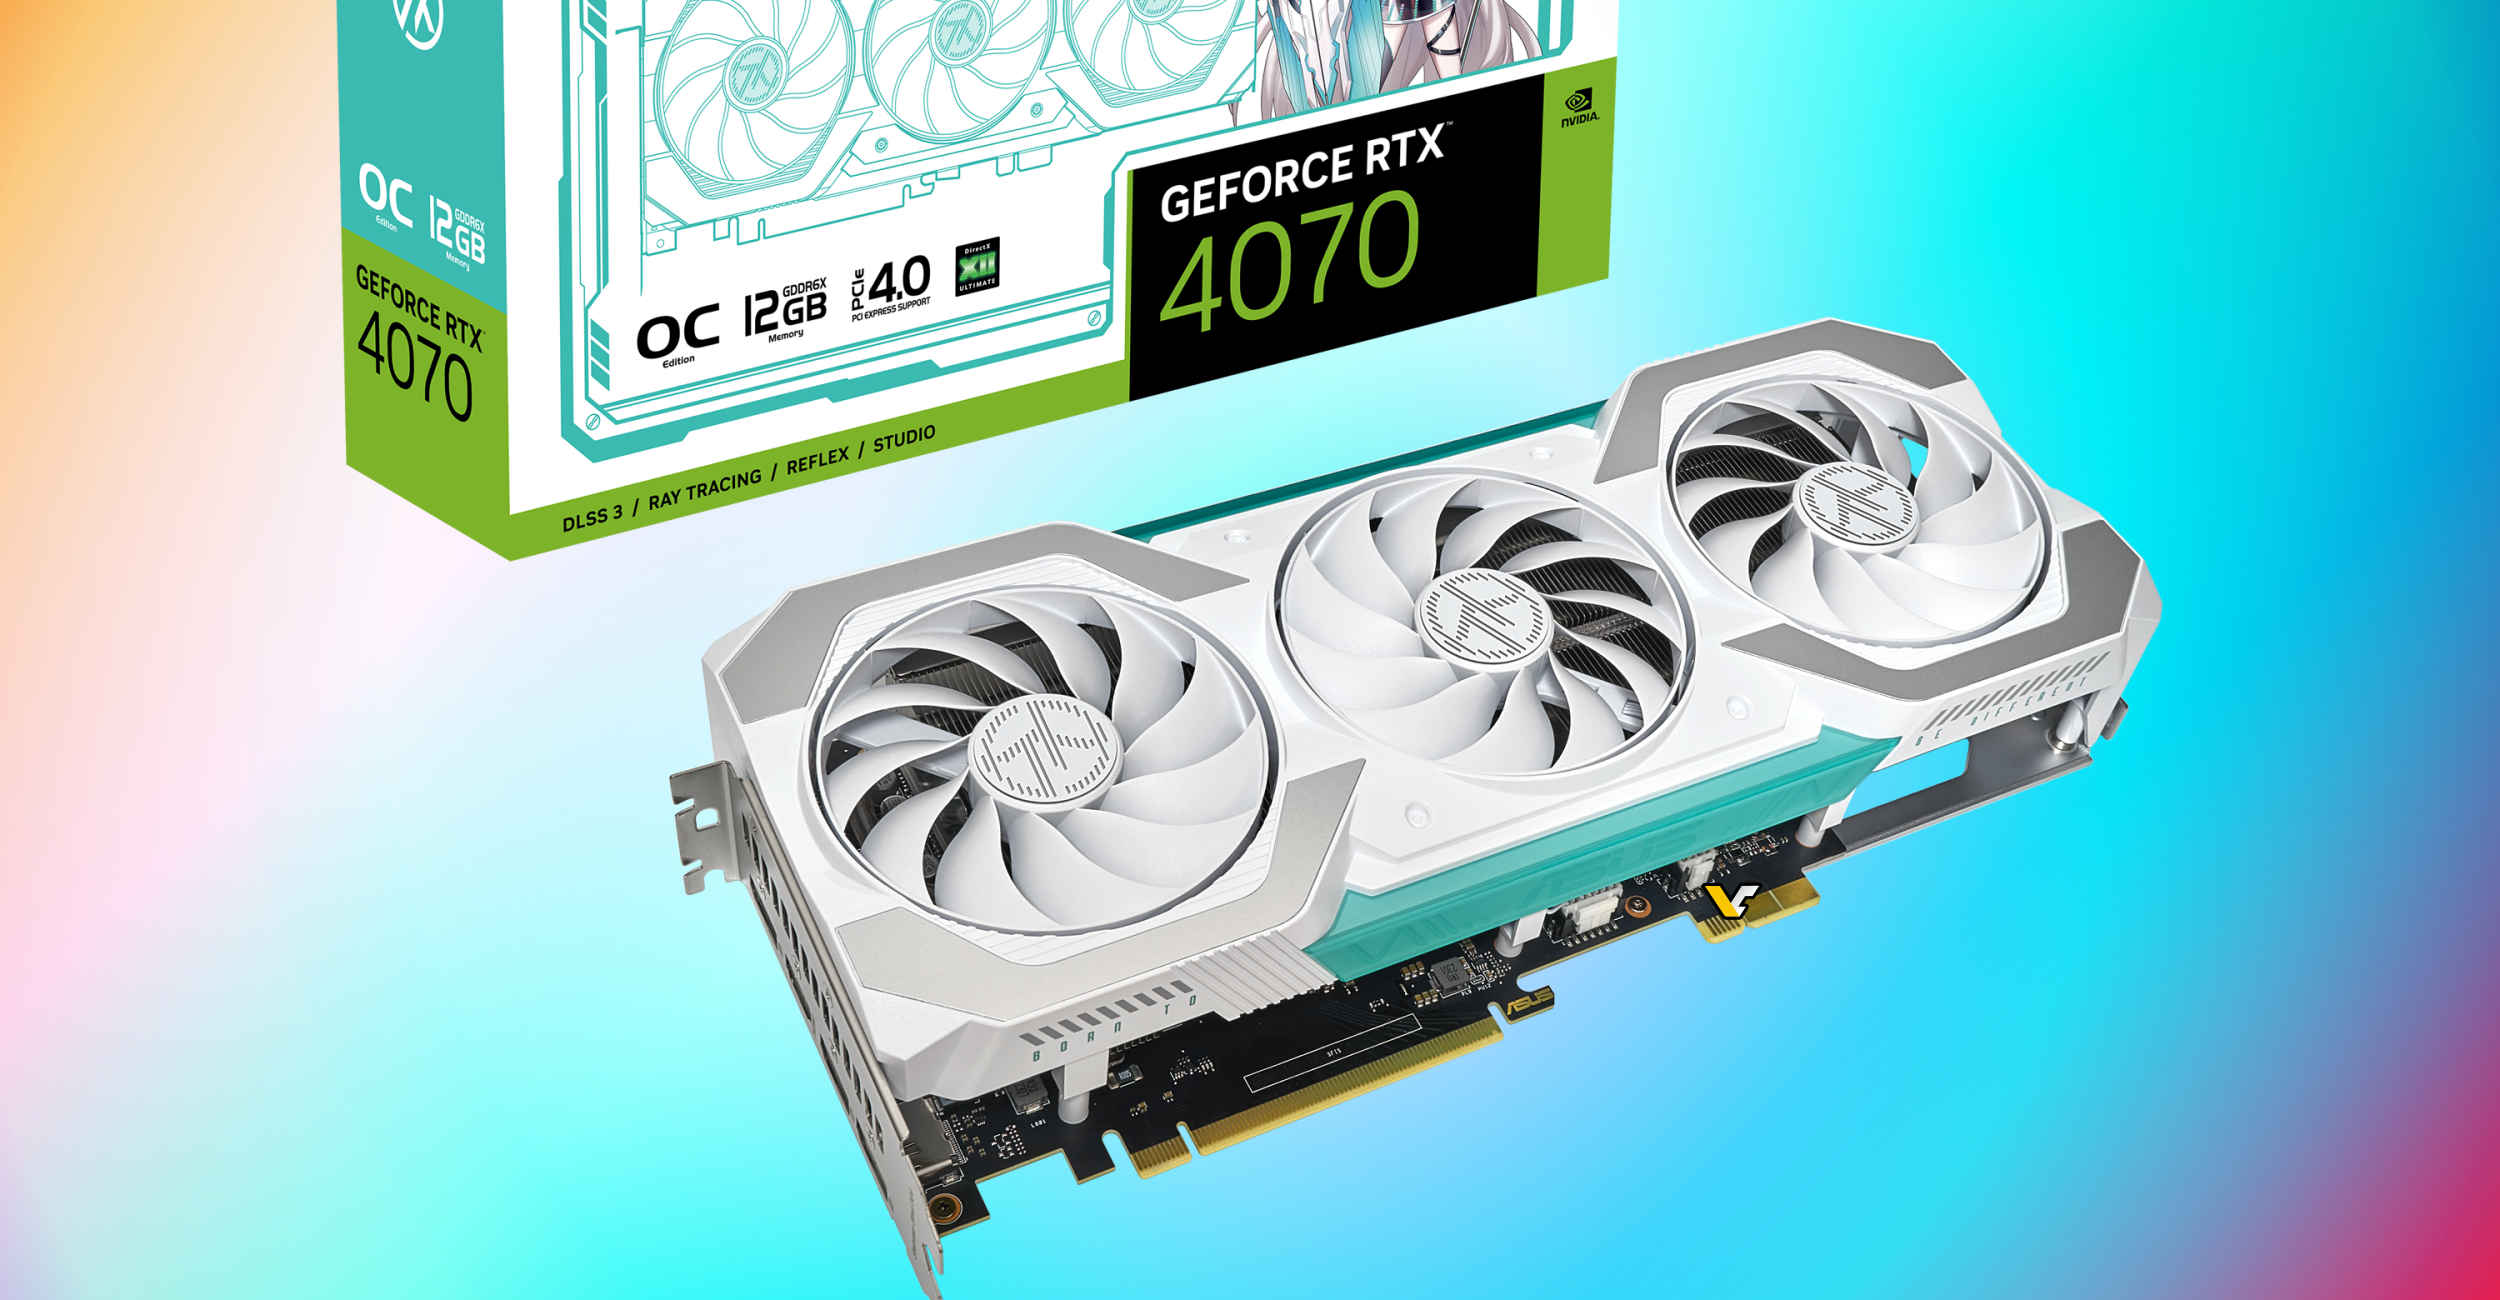 ASUS GeForce RTX 4070 SUPER DUAL with 12GB memory has been leaked